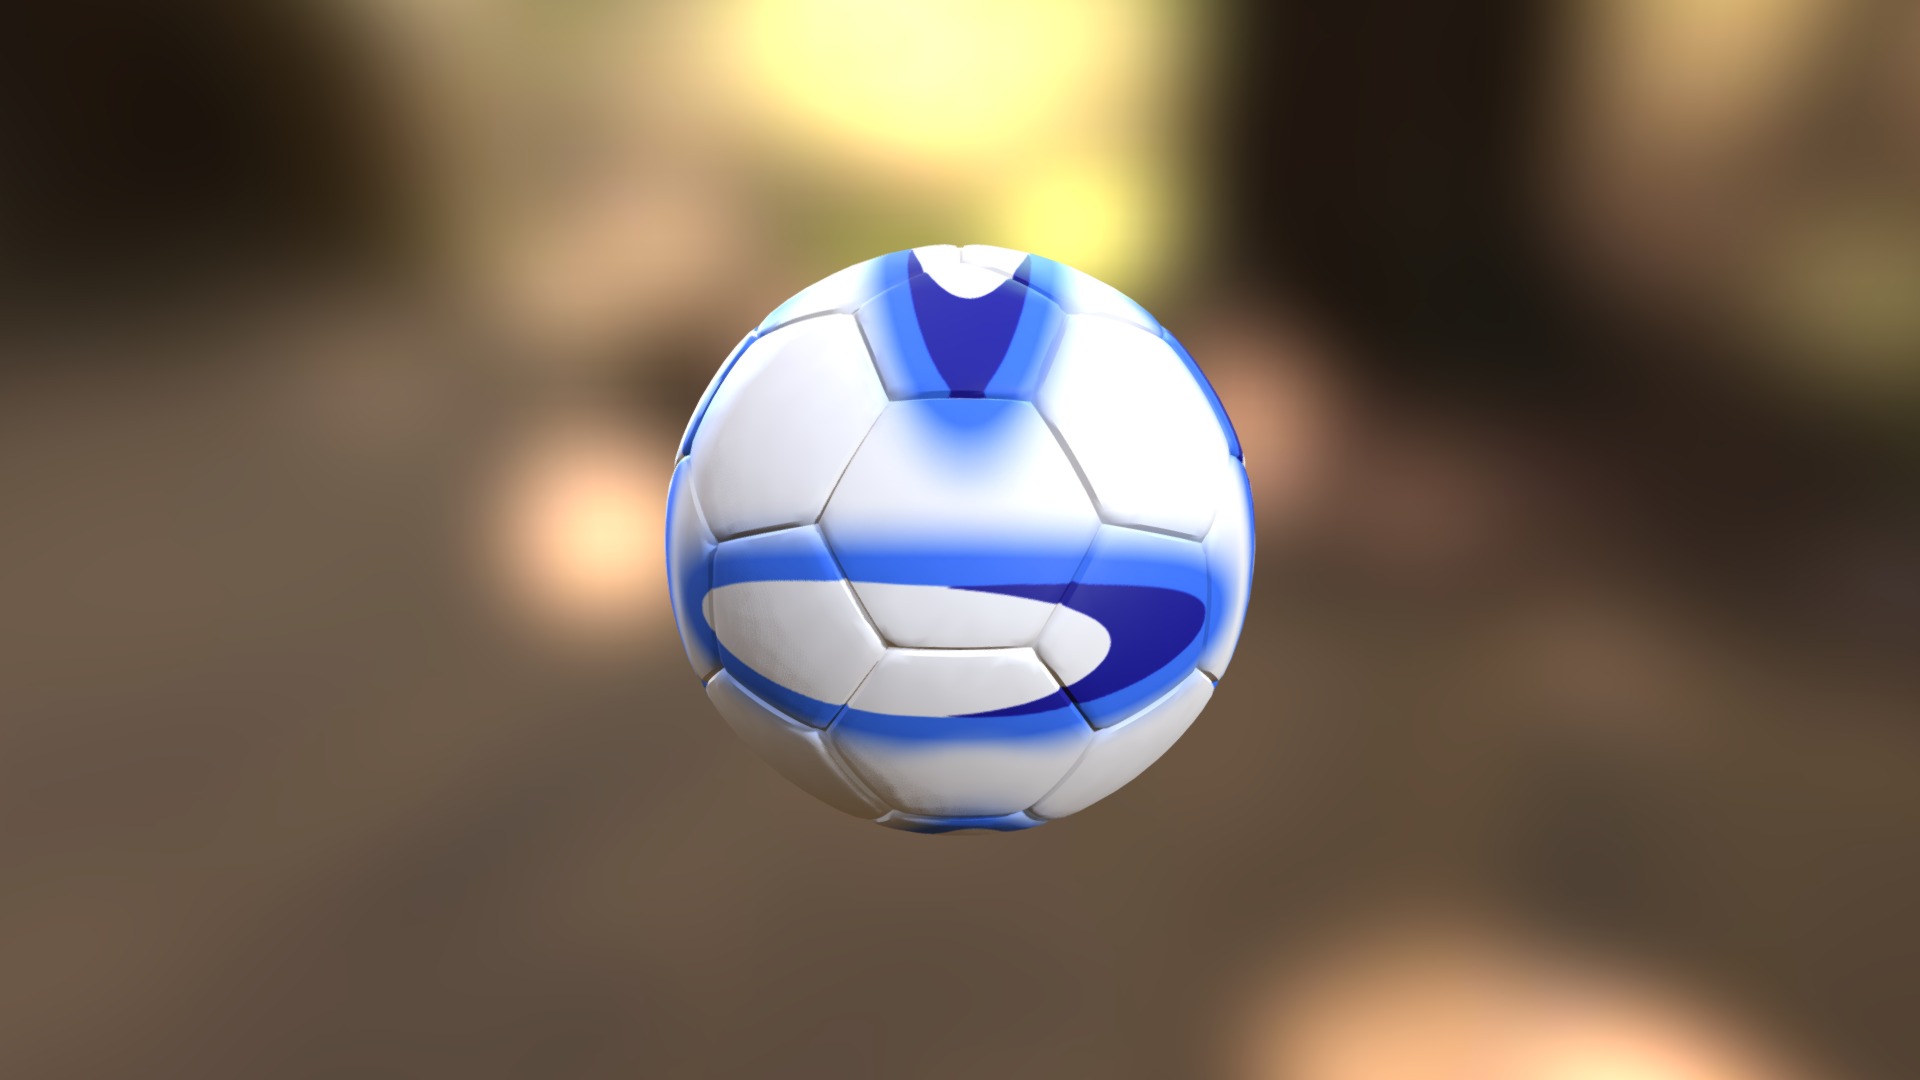 3D model Football - This is a 3D model of the Football. The 3D model is about a blue and white ball.